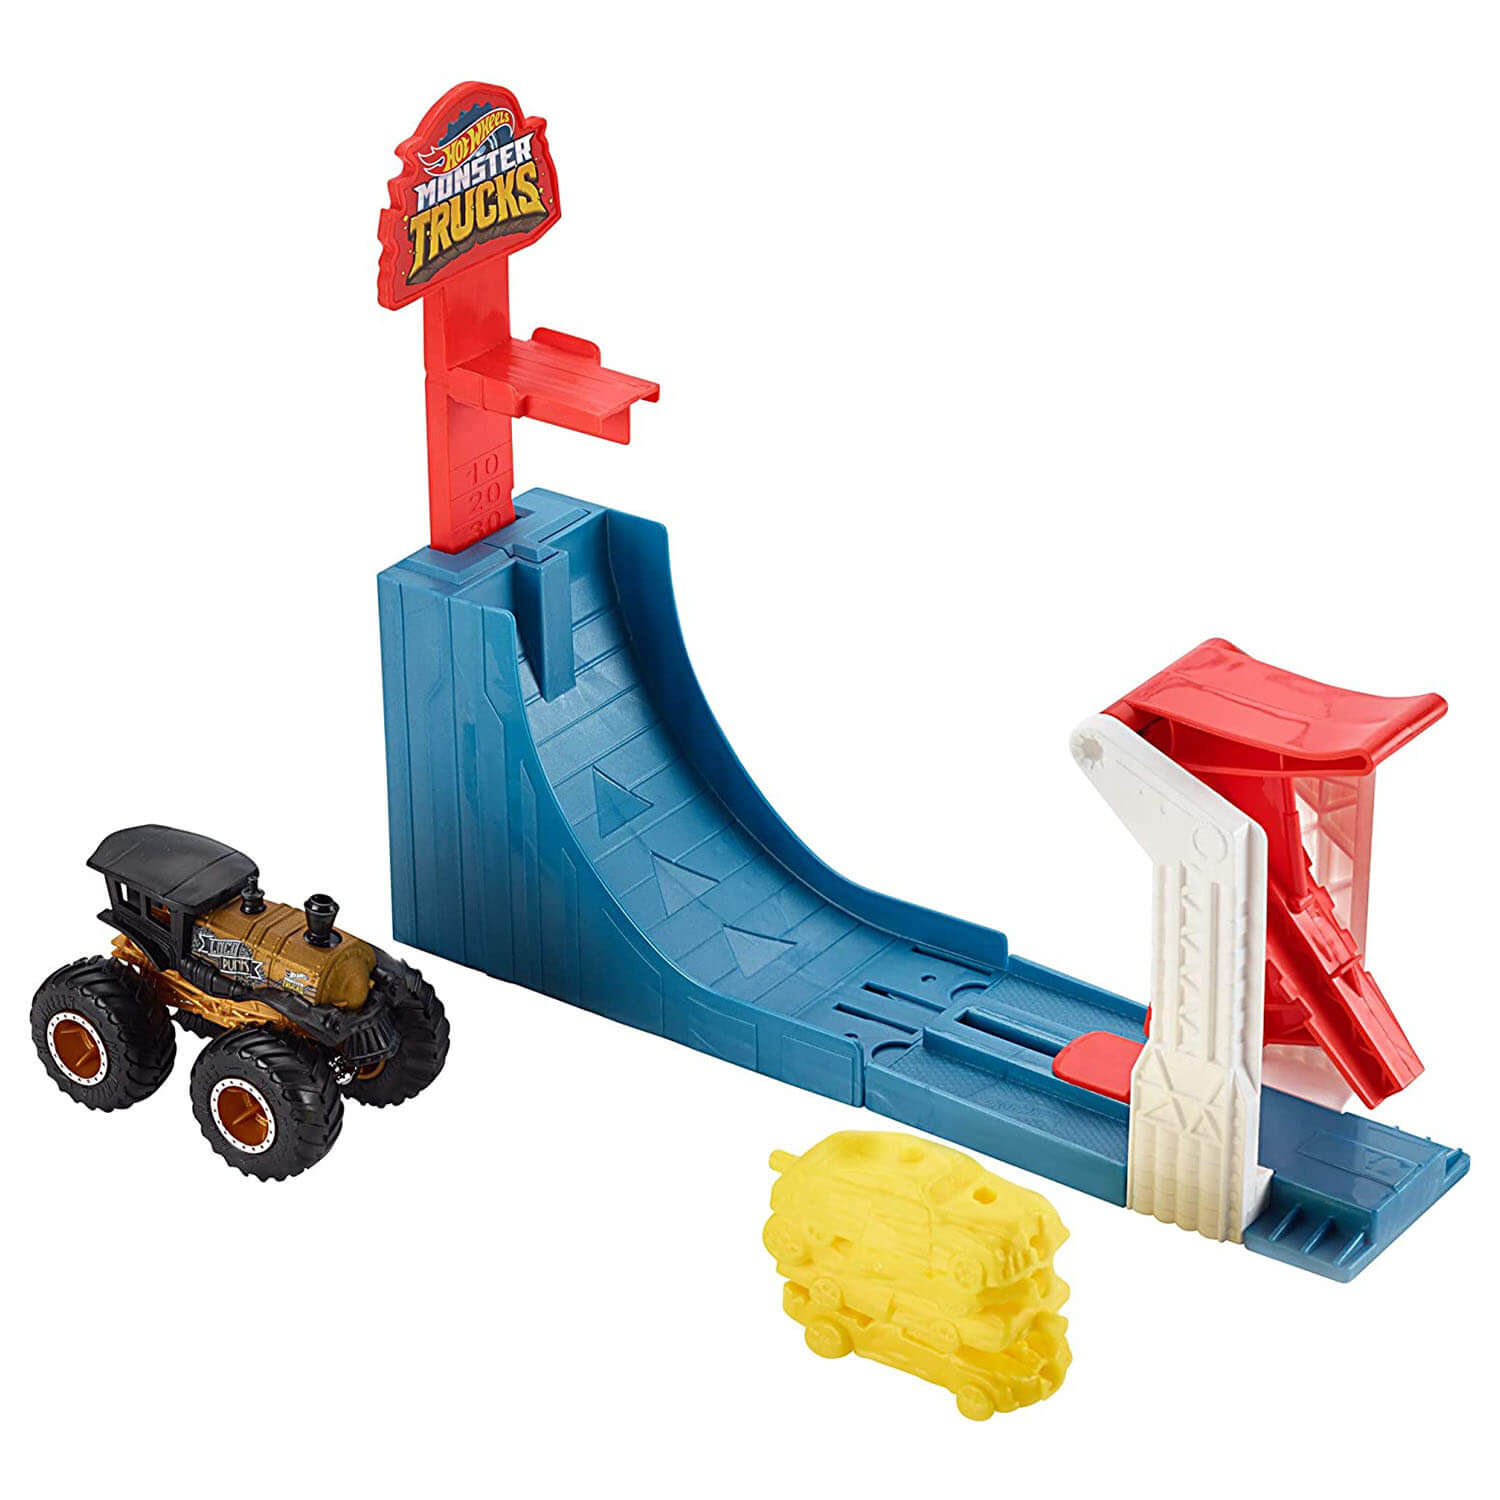 Front view of the Hot Wheels Monster Trucks Big Air Breakout.